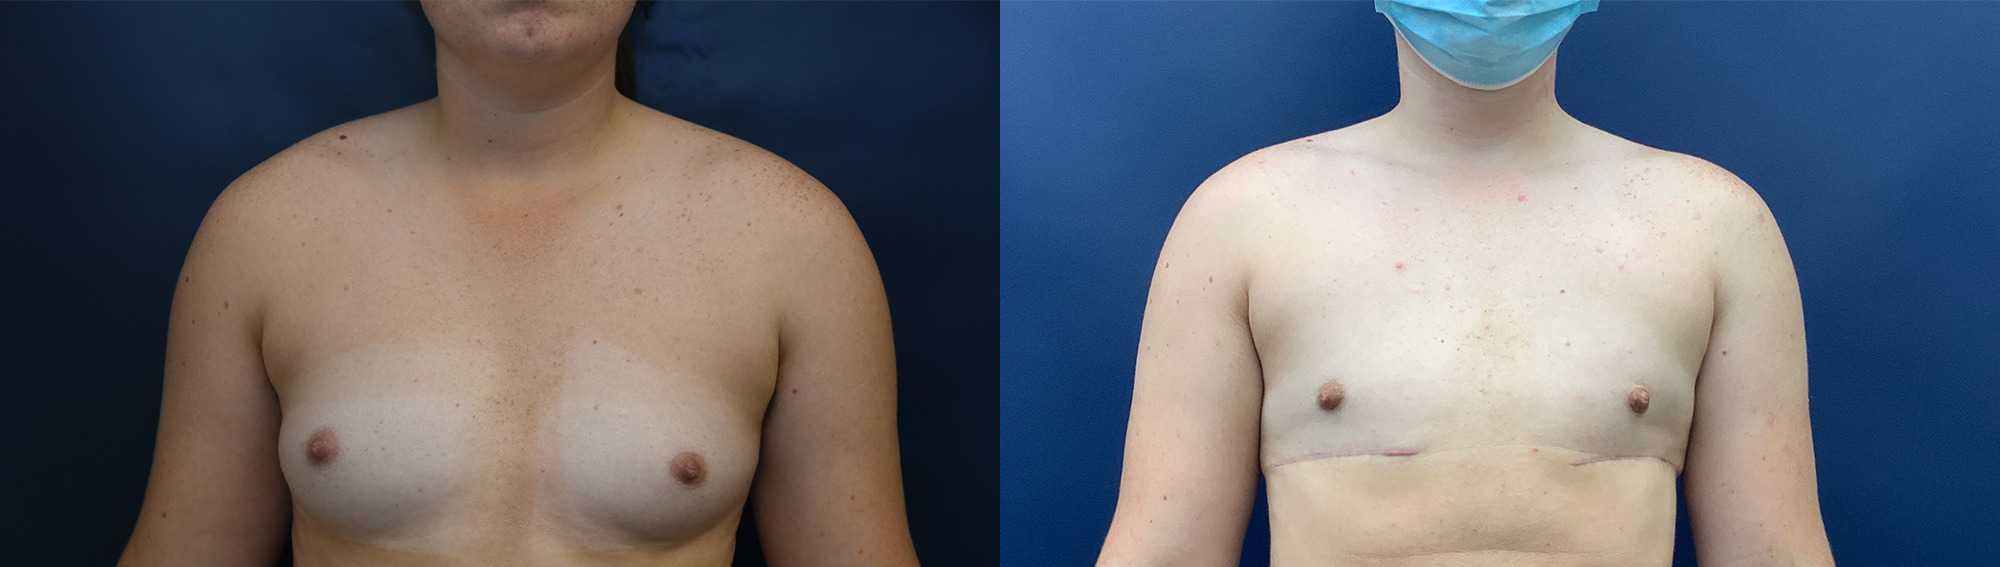 Female to Male Top Surgery by Dr. Butler Before and After Photo by Dr. Butler in Pensacola Florida